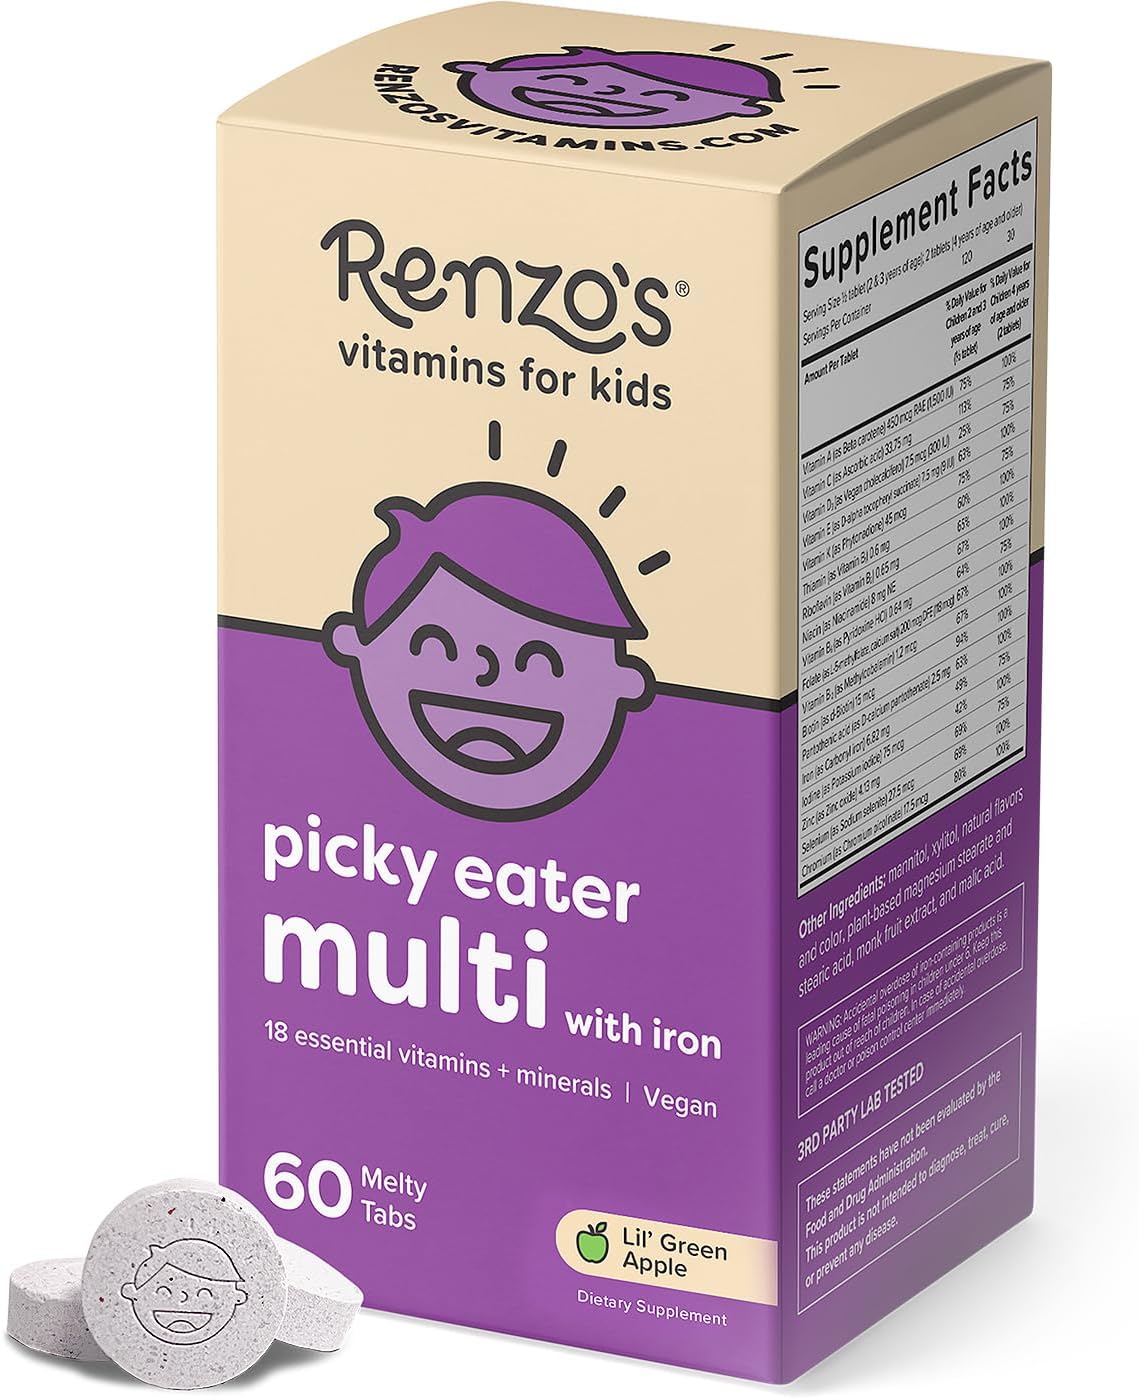 Renzo’s Picky Eater Kids Multivitamin with Iron - Dissolving Kids Vitamins with Vitamin D3 & K2 and More - 60 Sugar-Free Melty Tabs, Lil’ Green Apple Flavored